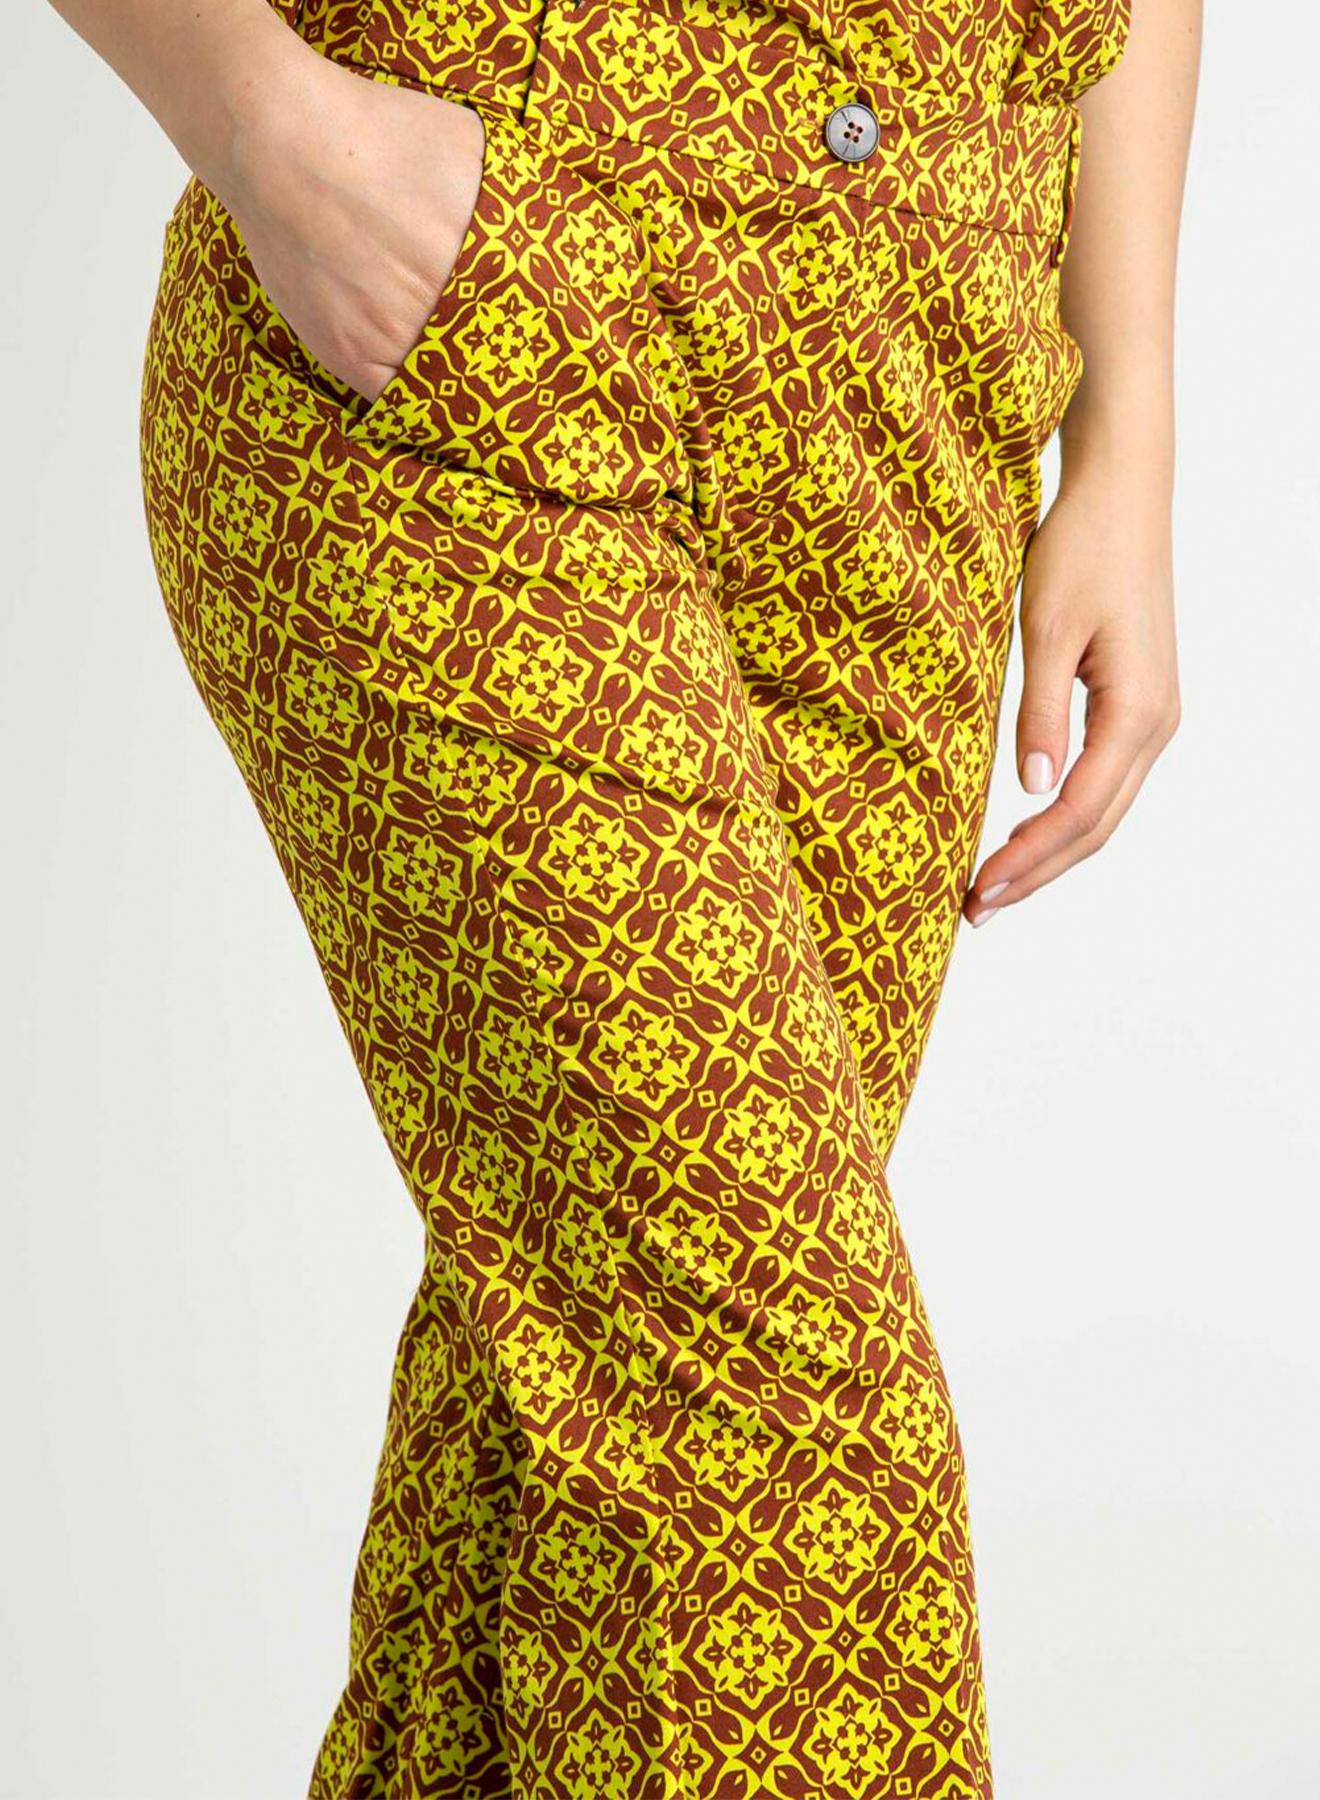 Slightly-flare-fit patterned trousers - 2